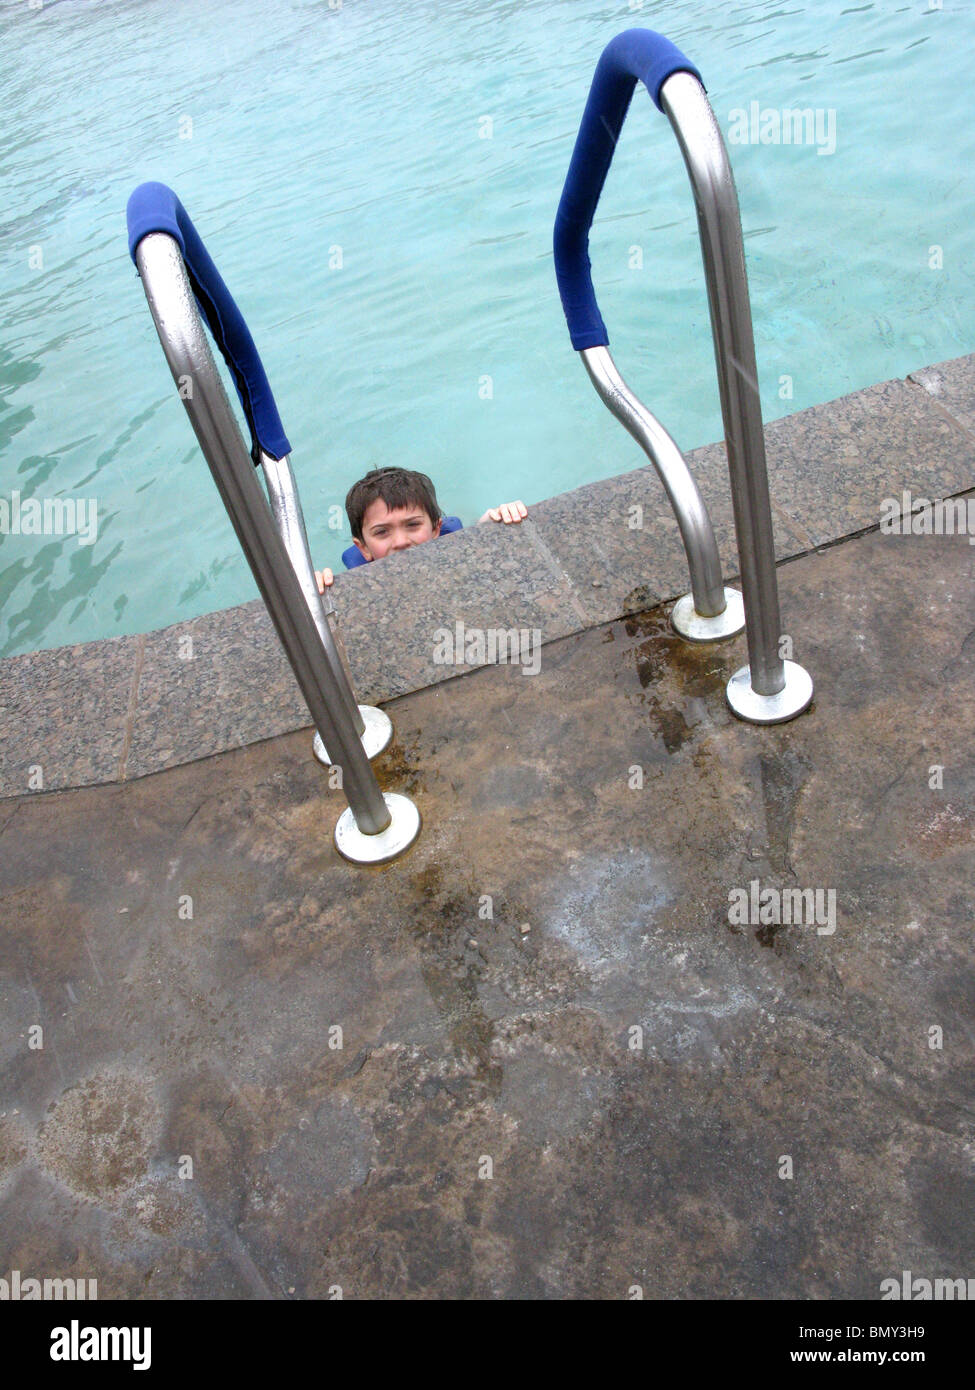 A young boy at the edge of an outdoor swimming pool's ladder Stock Photo